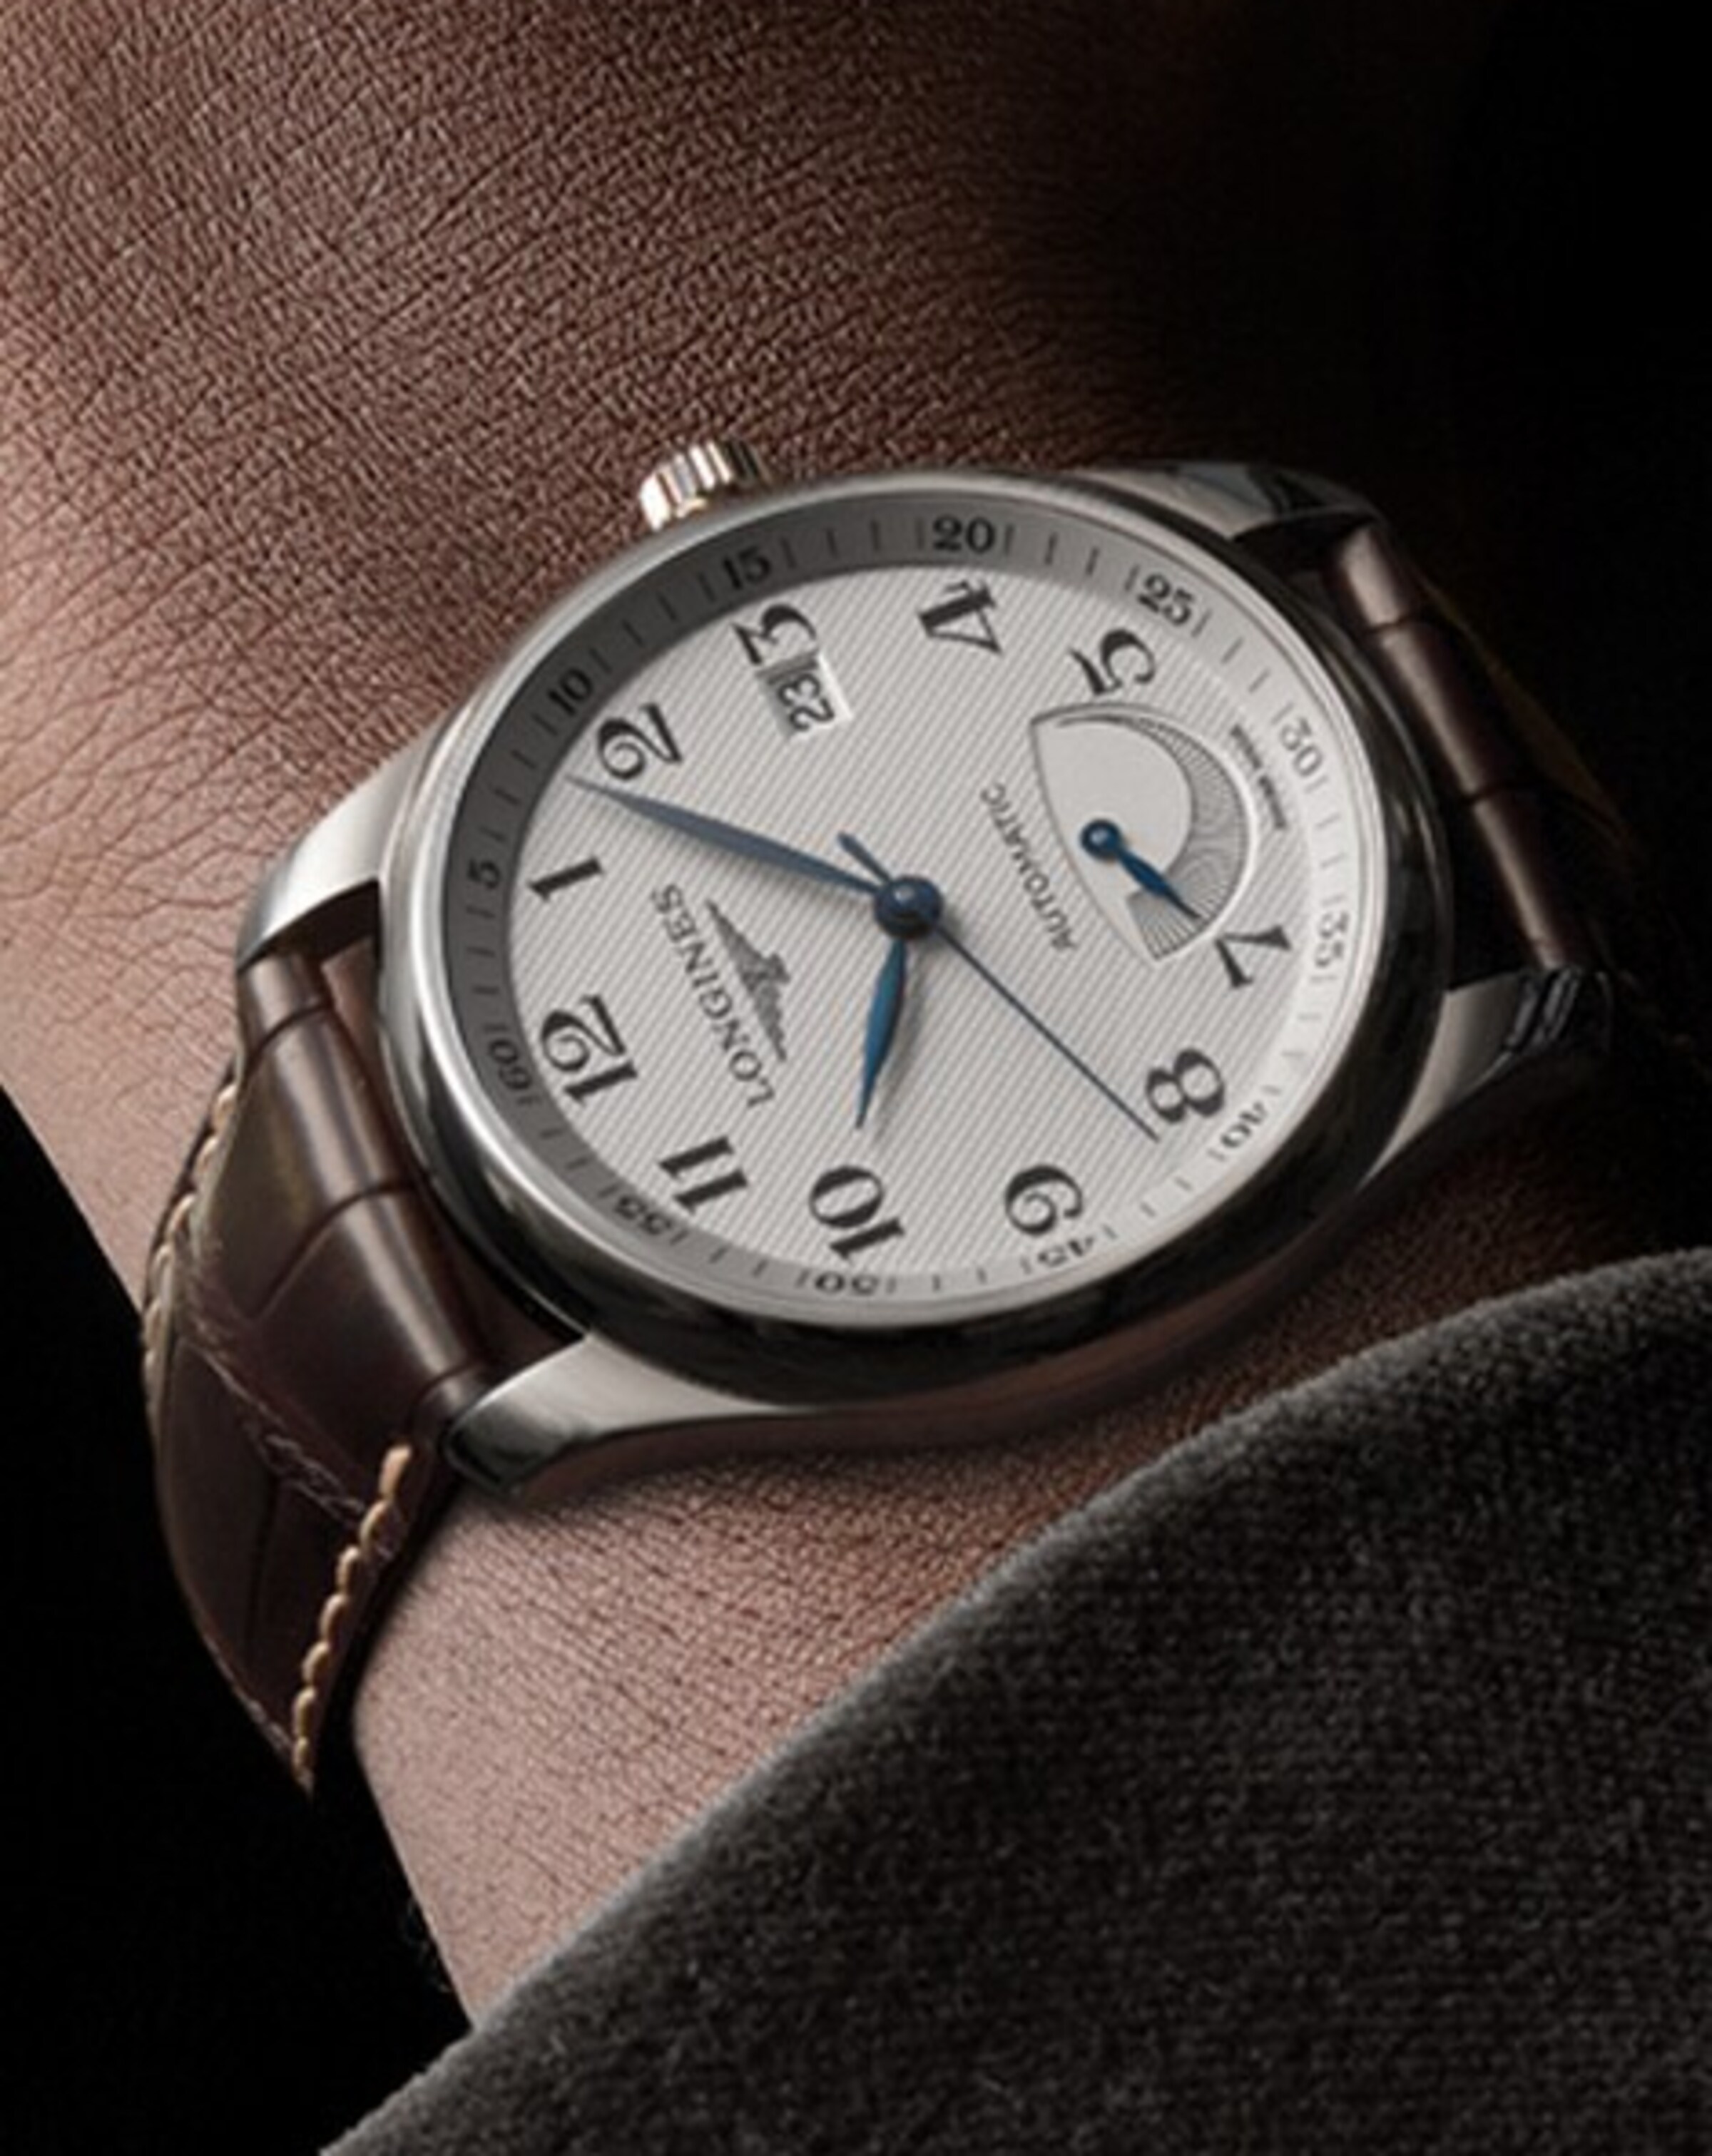 The Longines watch with Power Reserve feature